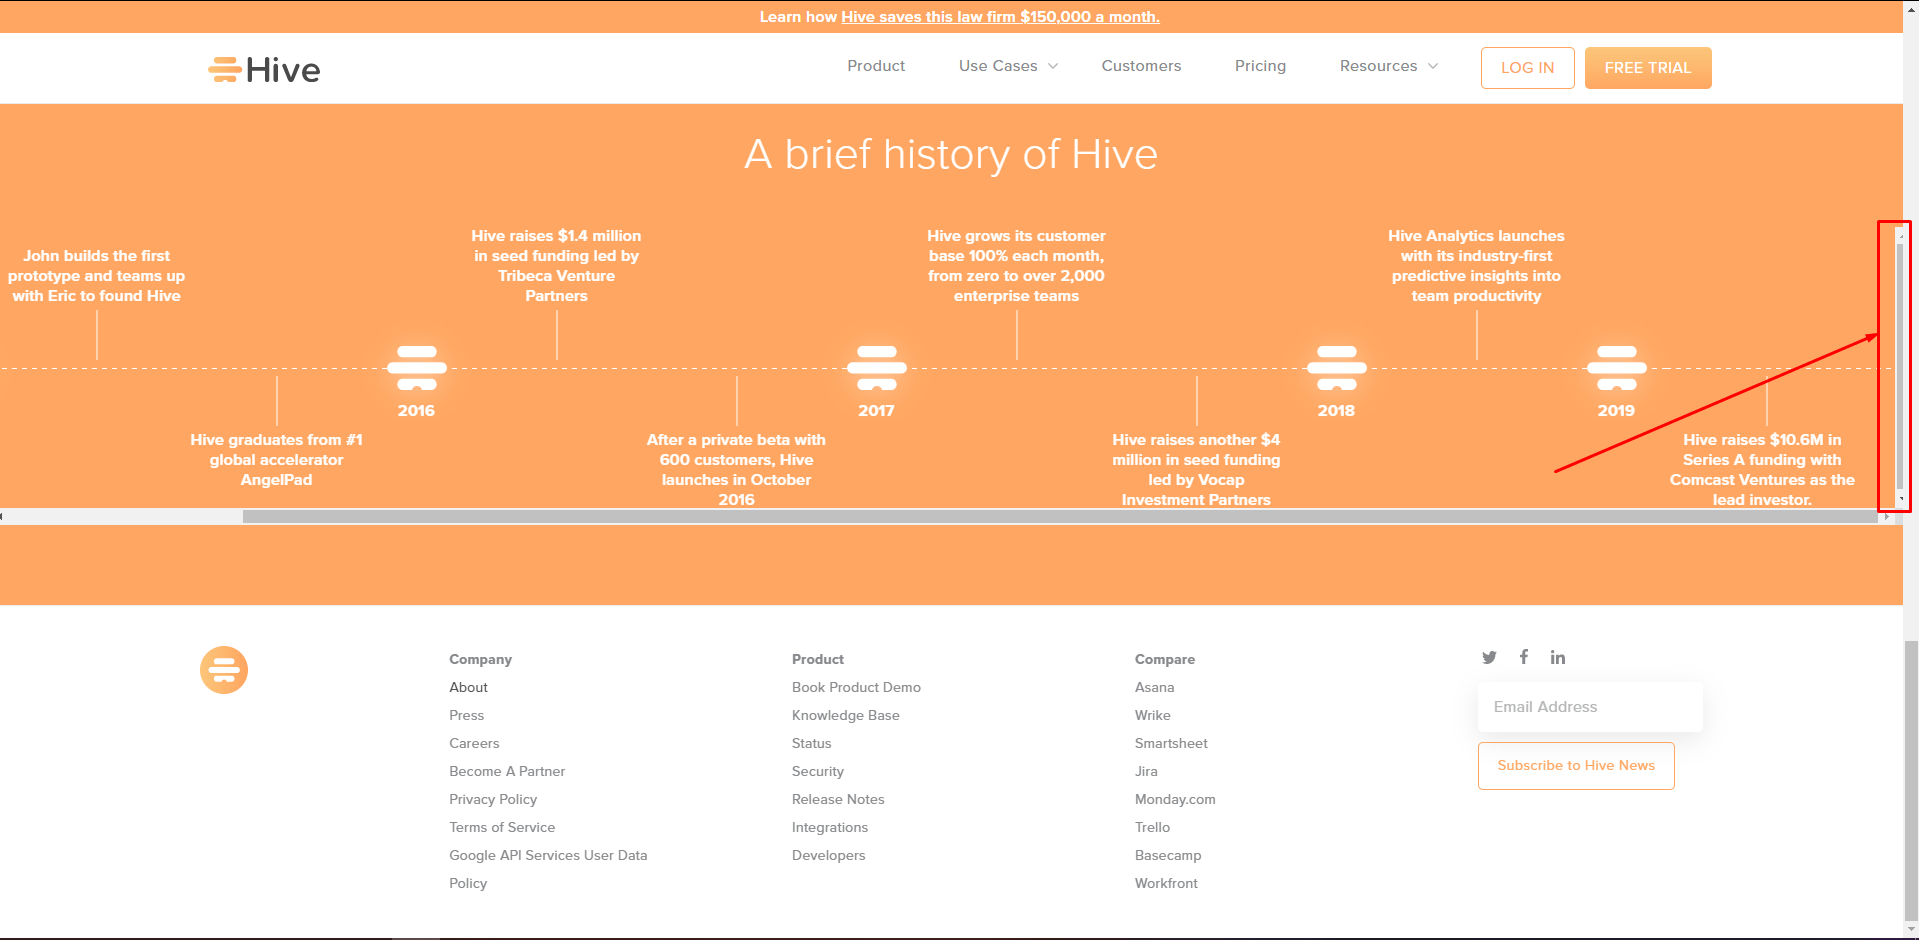 A redundant scroll in the “A brief history of Hive” block